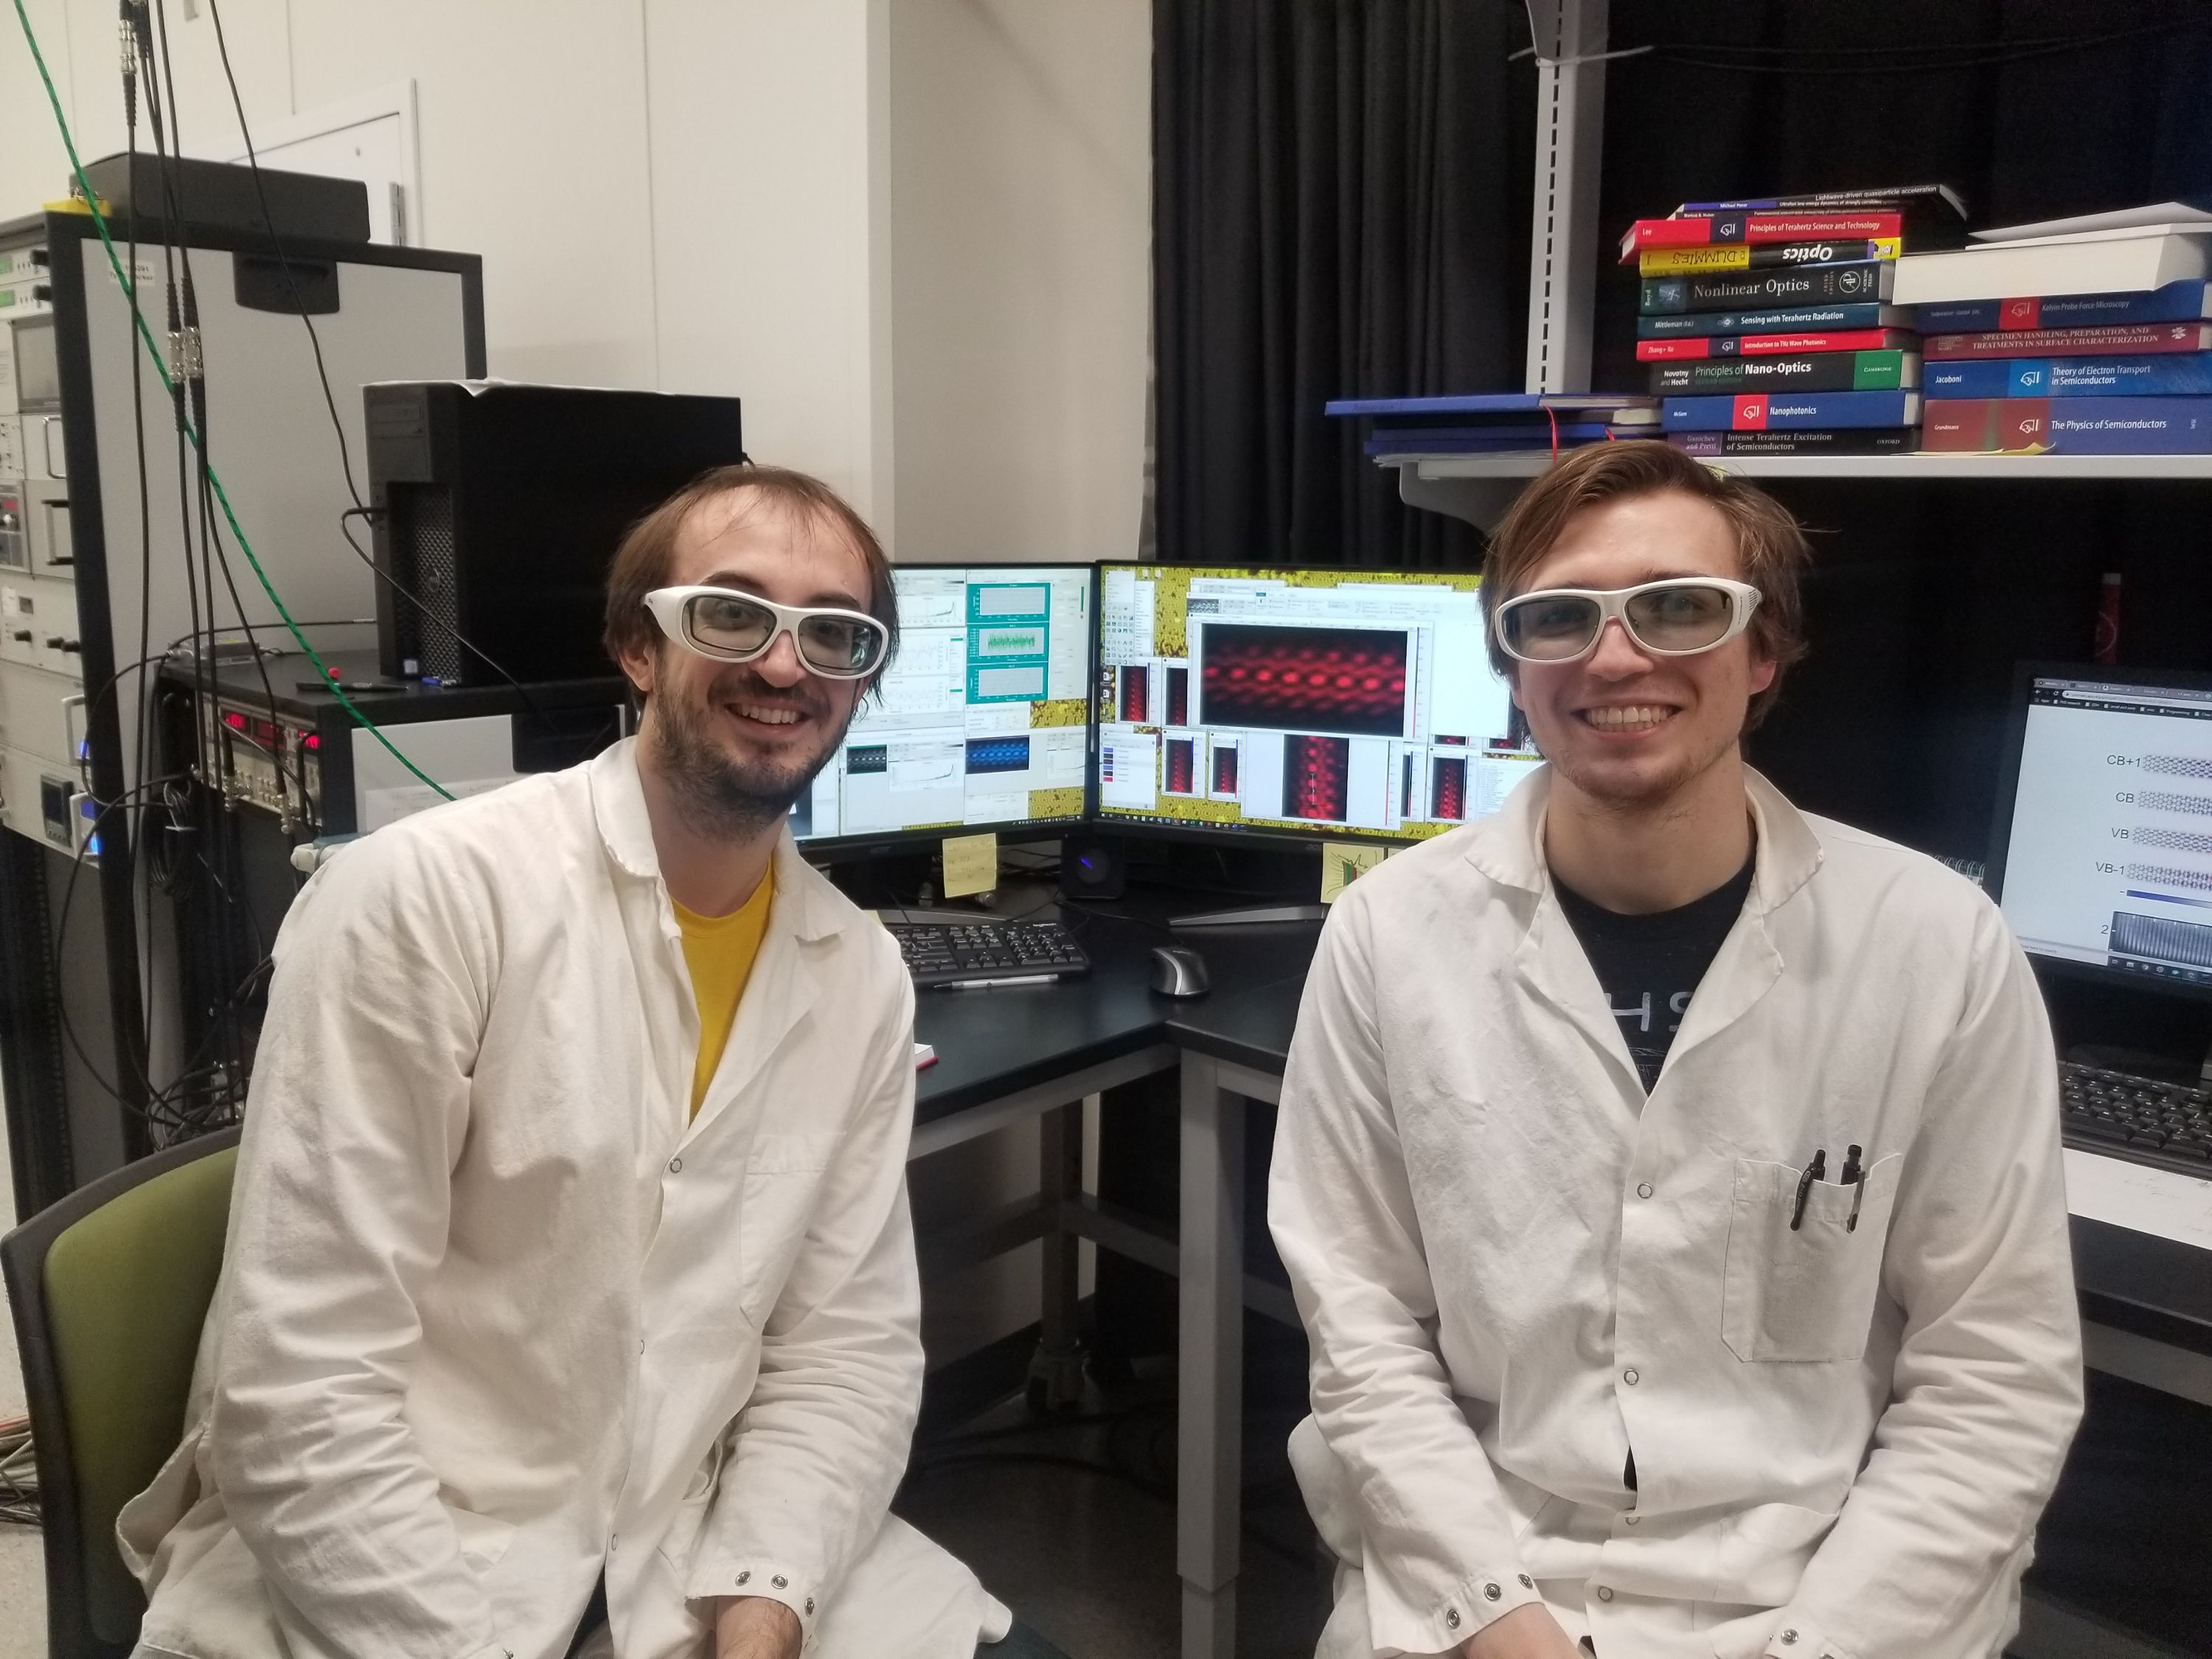 Postdoctoral scholar Vedran Jelic (left) and graduate student researcher Spencer Ammerman (right)